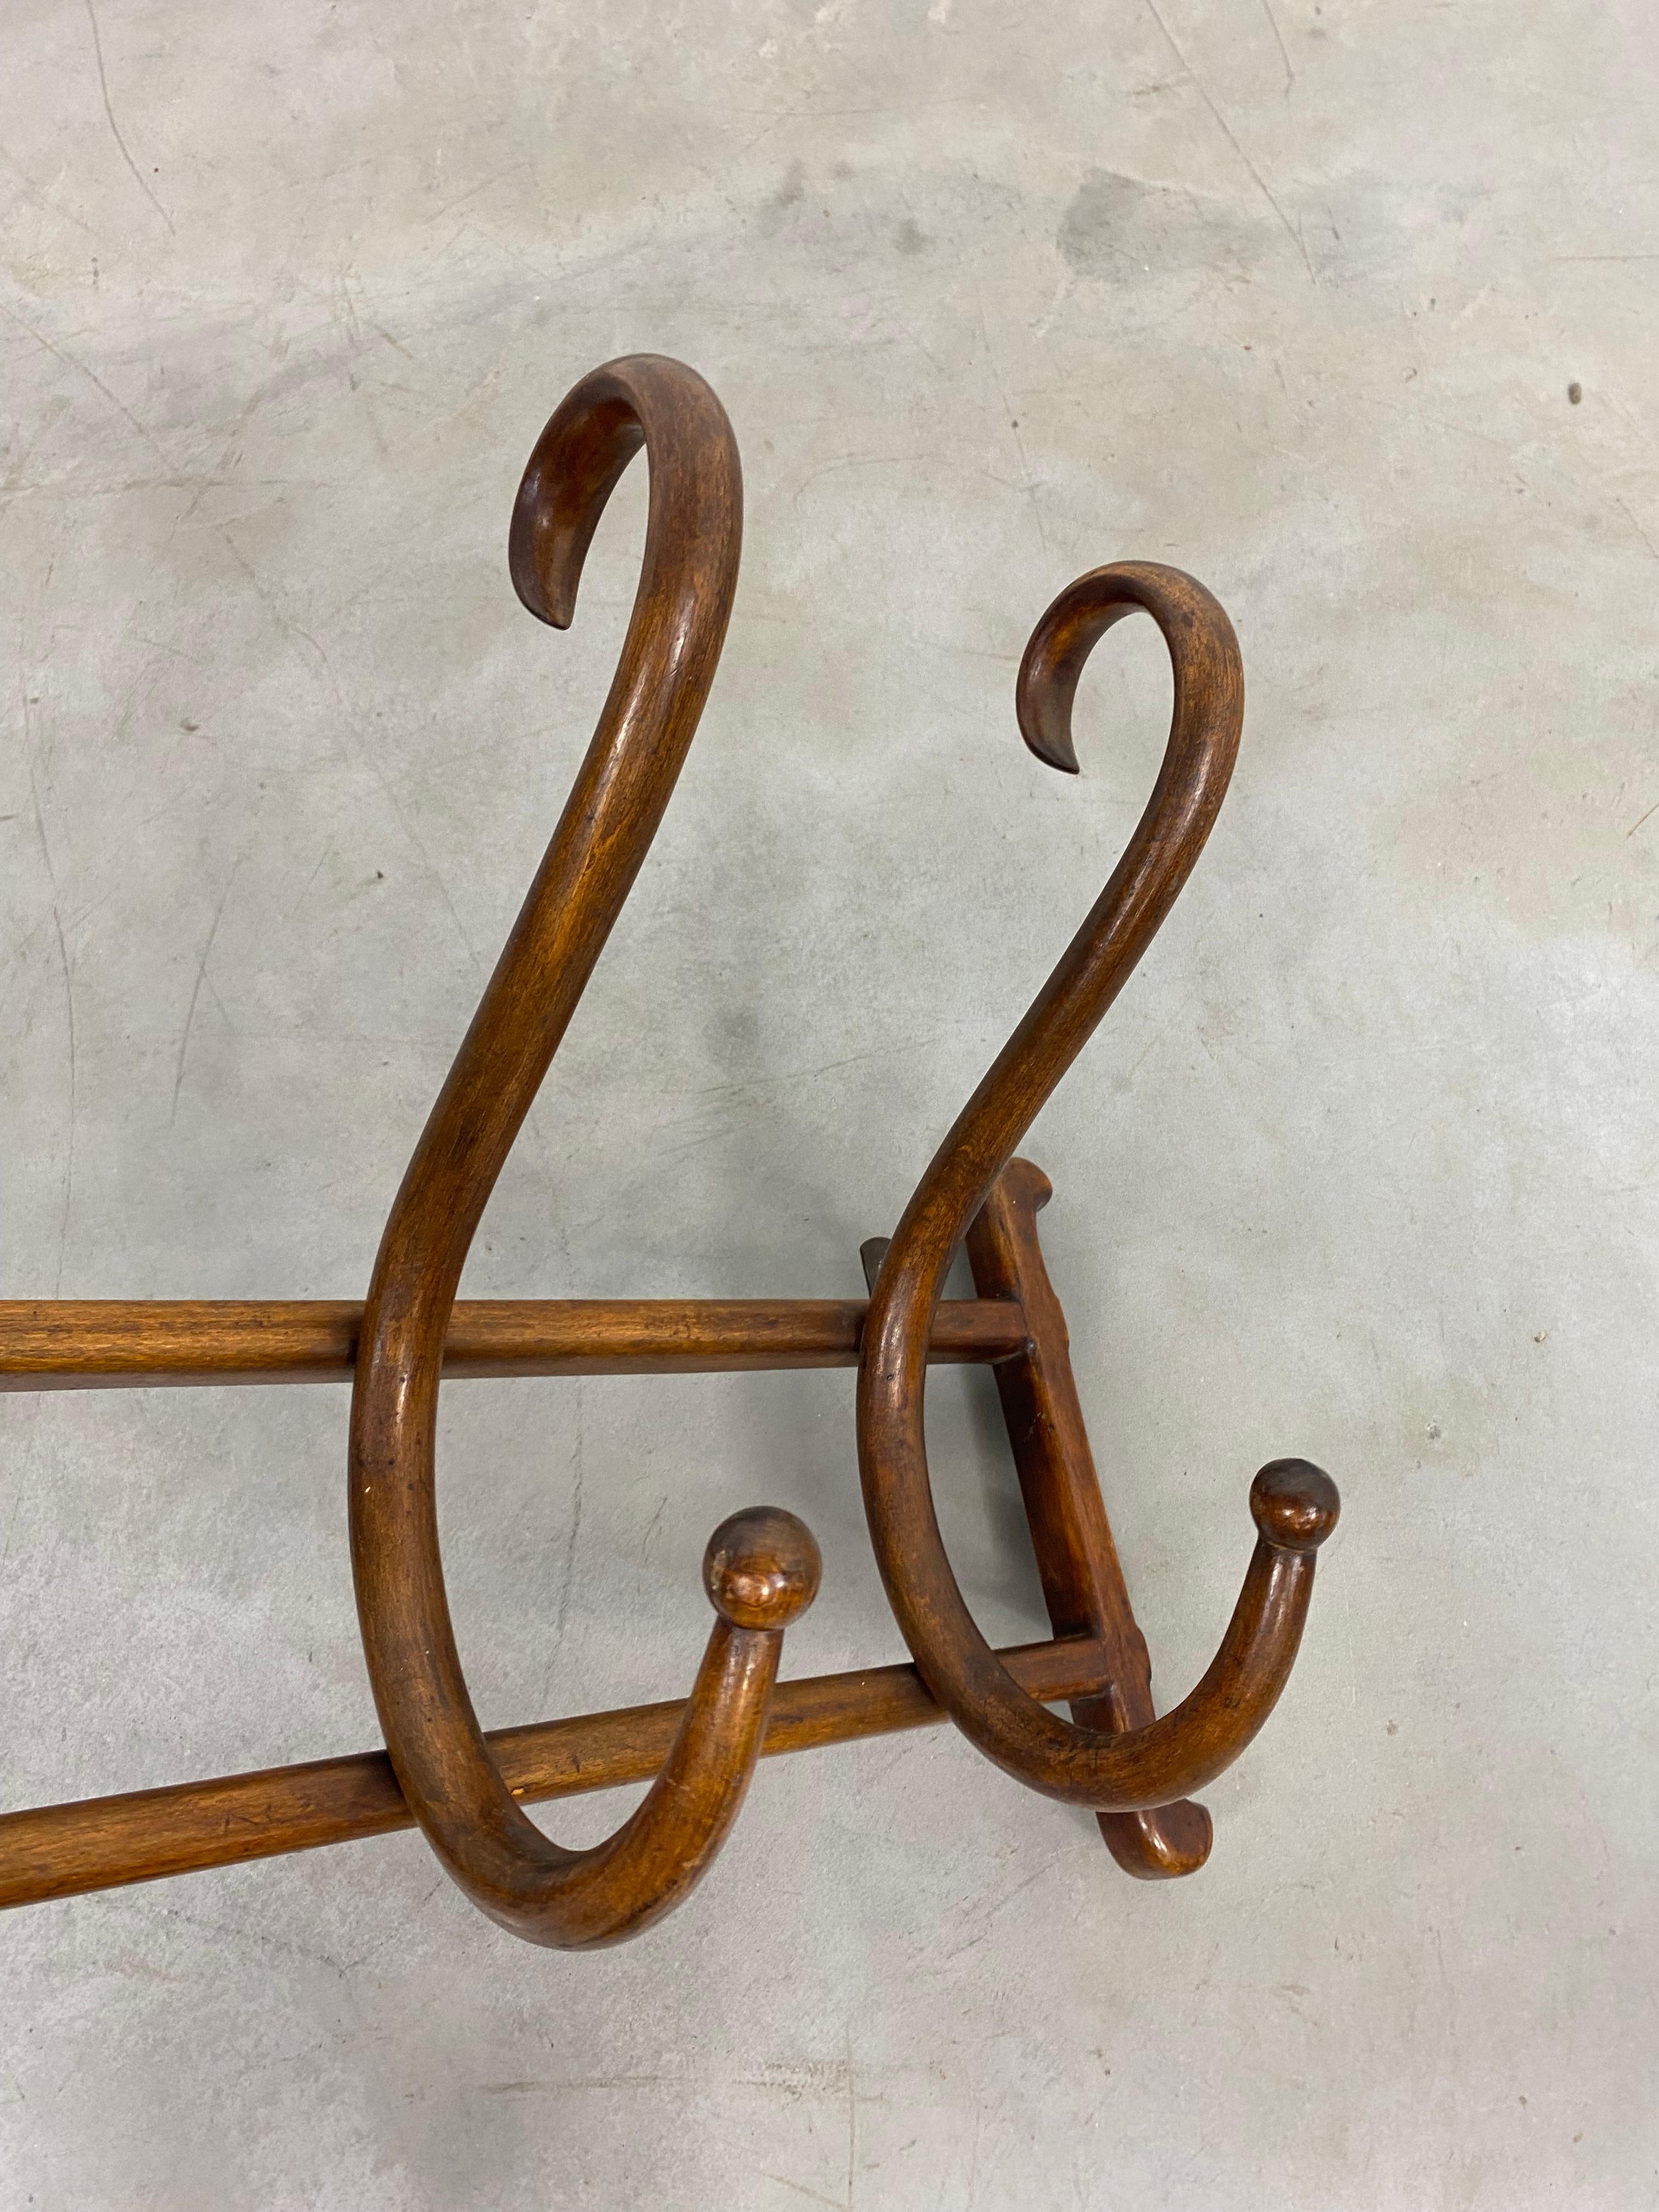 Vienna Secession Bentwood wall coat hanger no.1 by Thonet